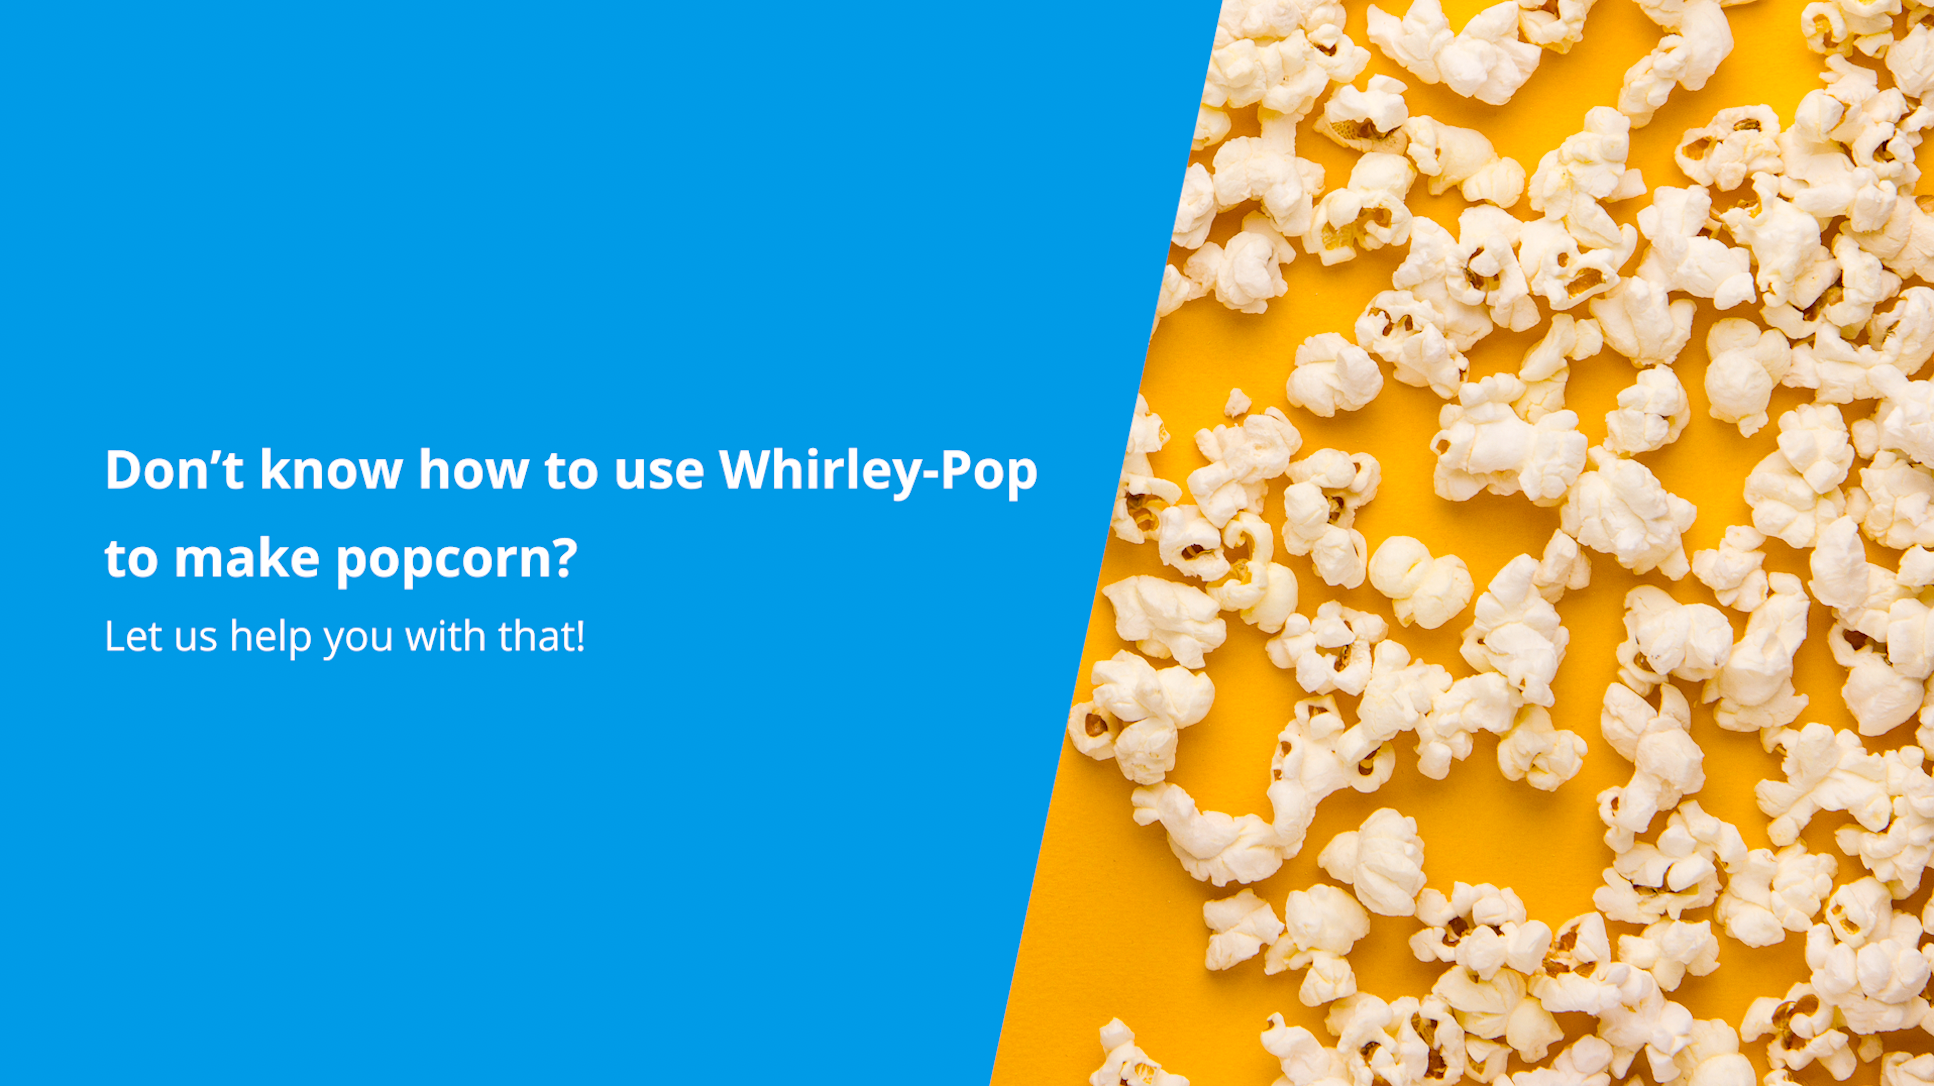 Load video: Learn to use Whirley-Pop to make your own homemade popcorn